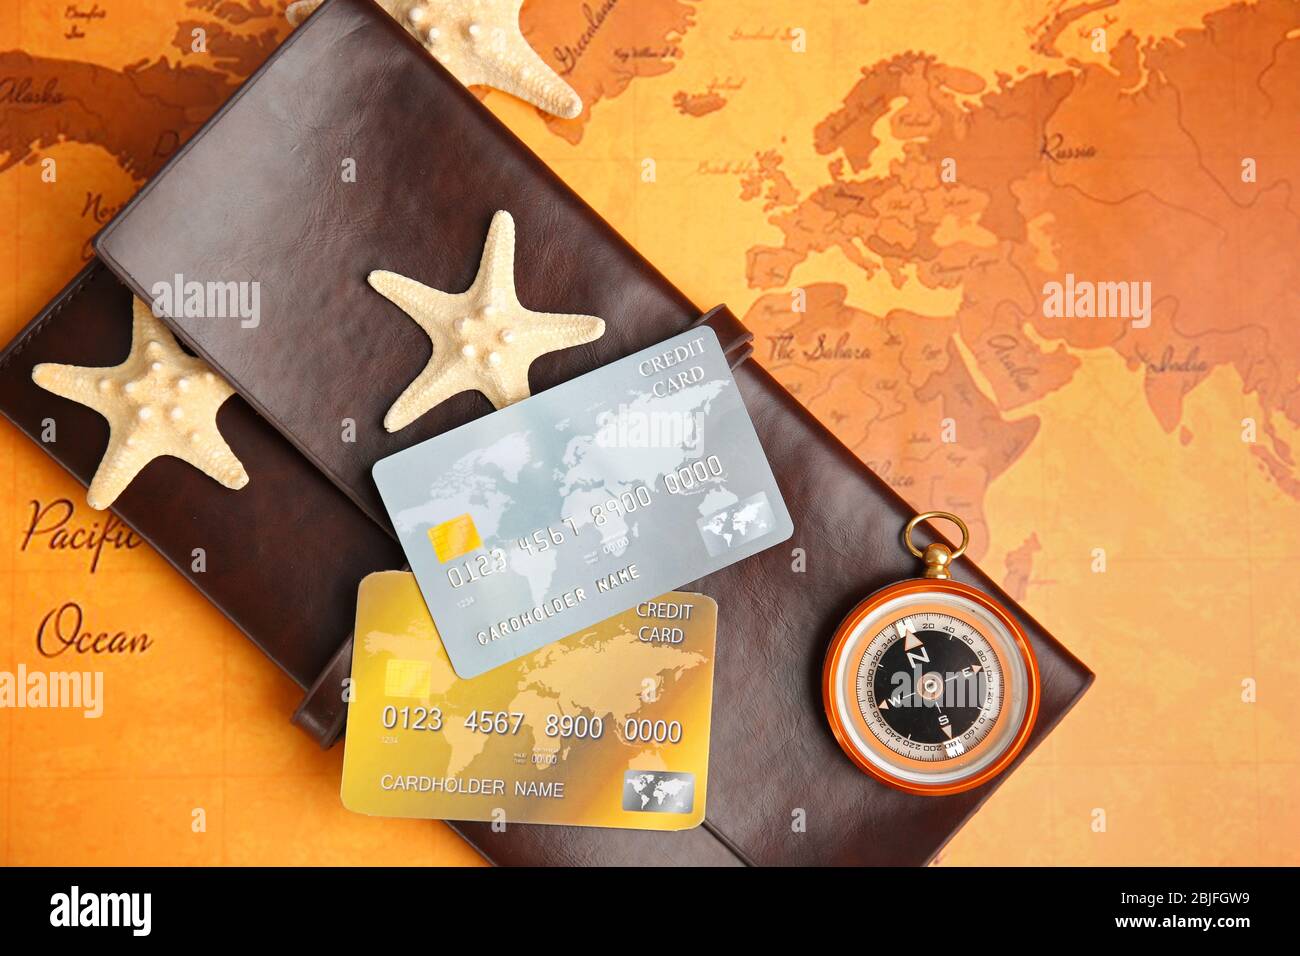 Credit cards with wallet on world map background Stock Photo